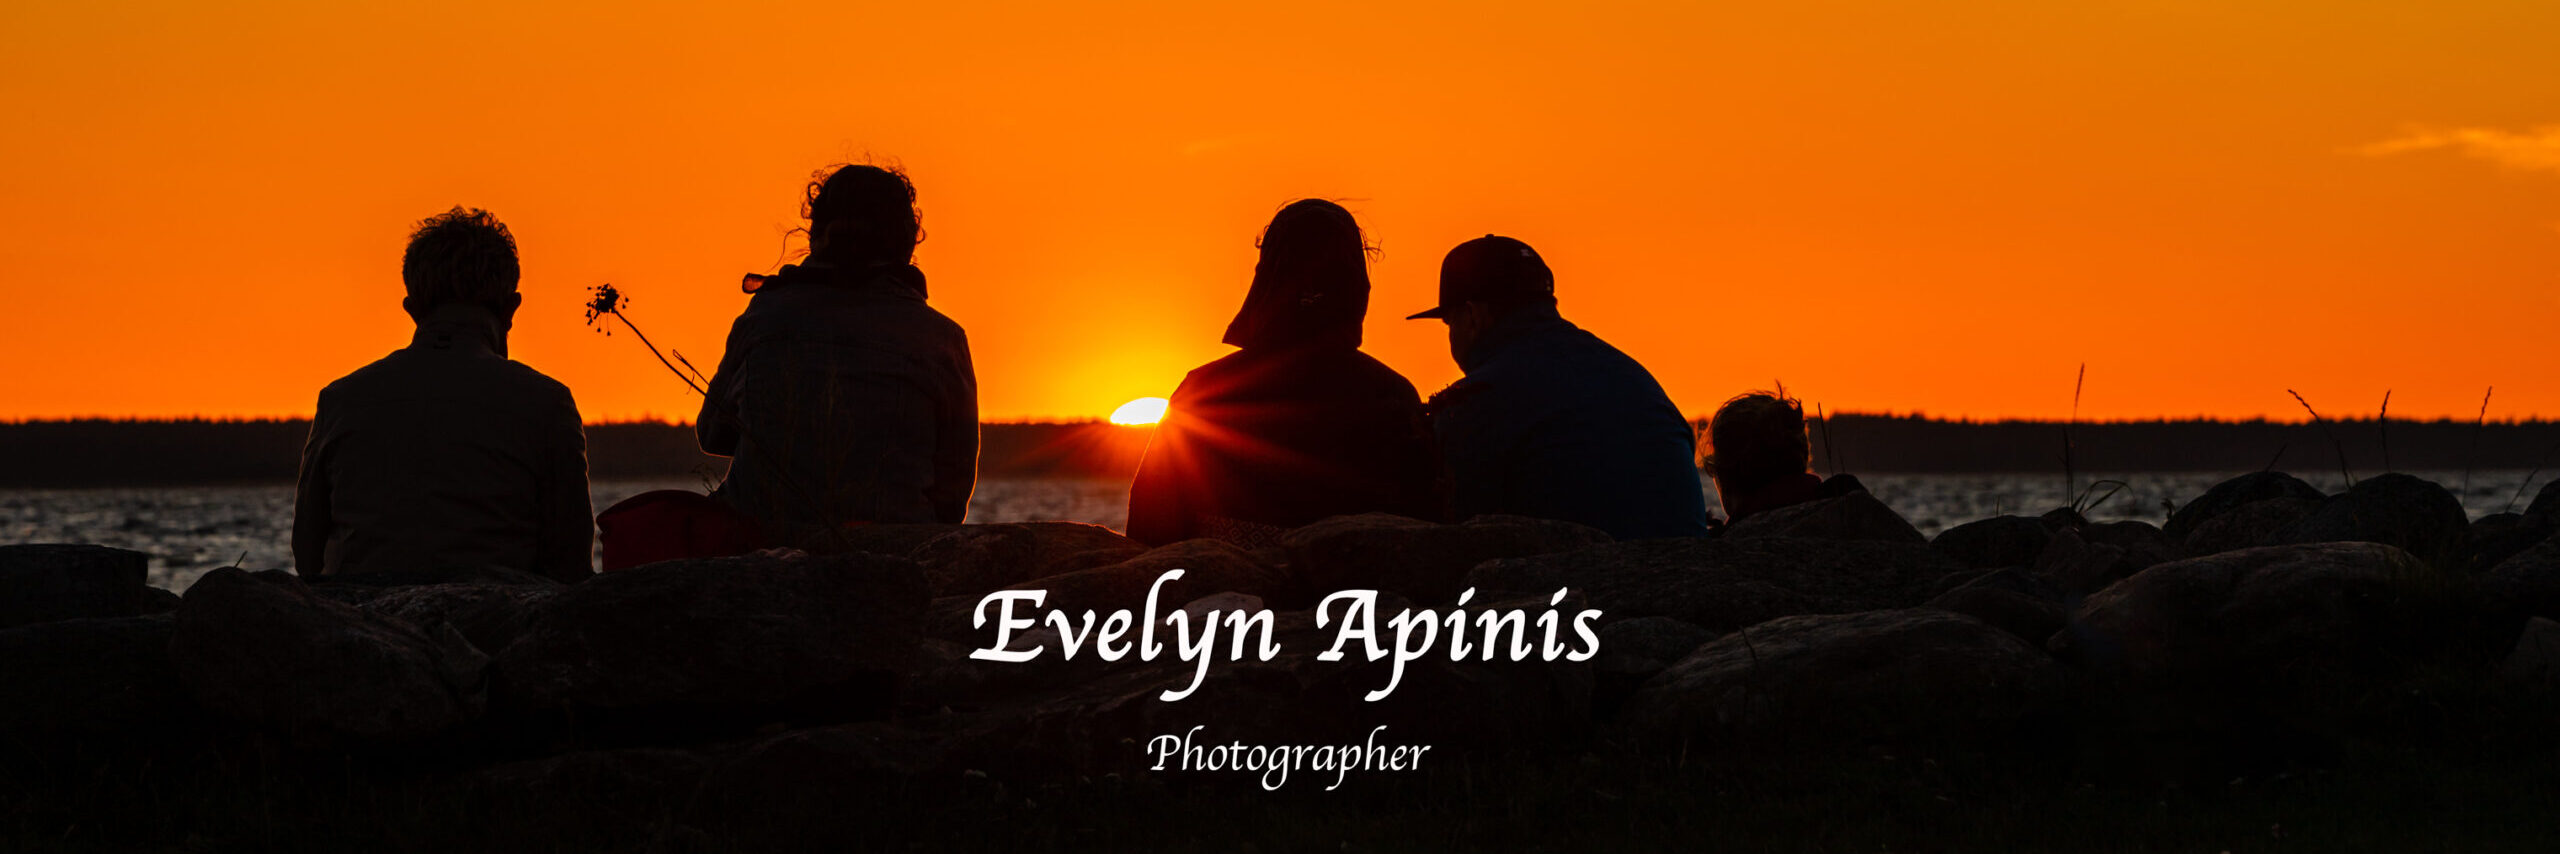 Evelyn Apinis